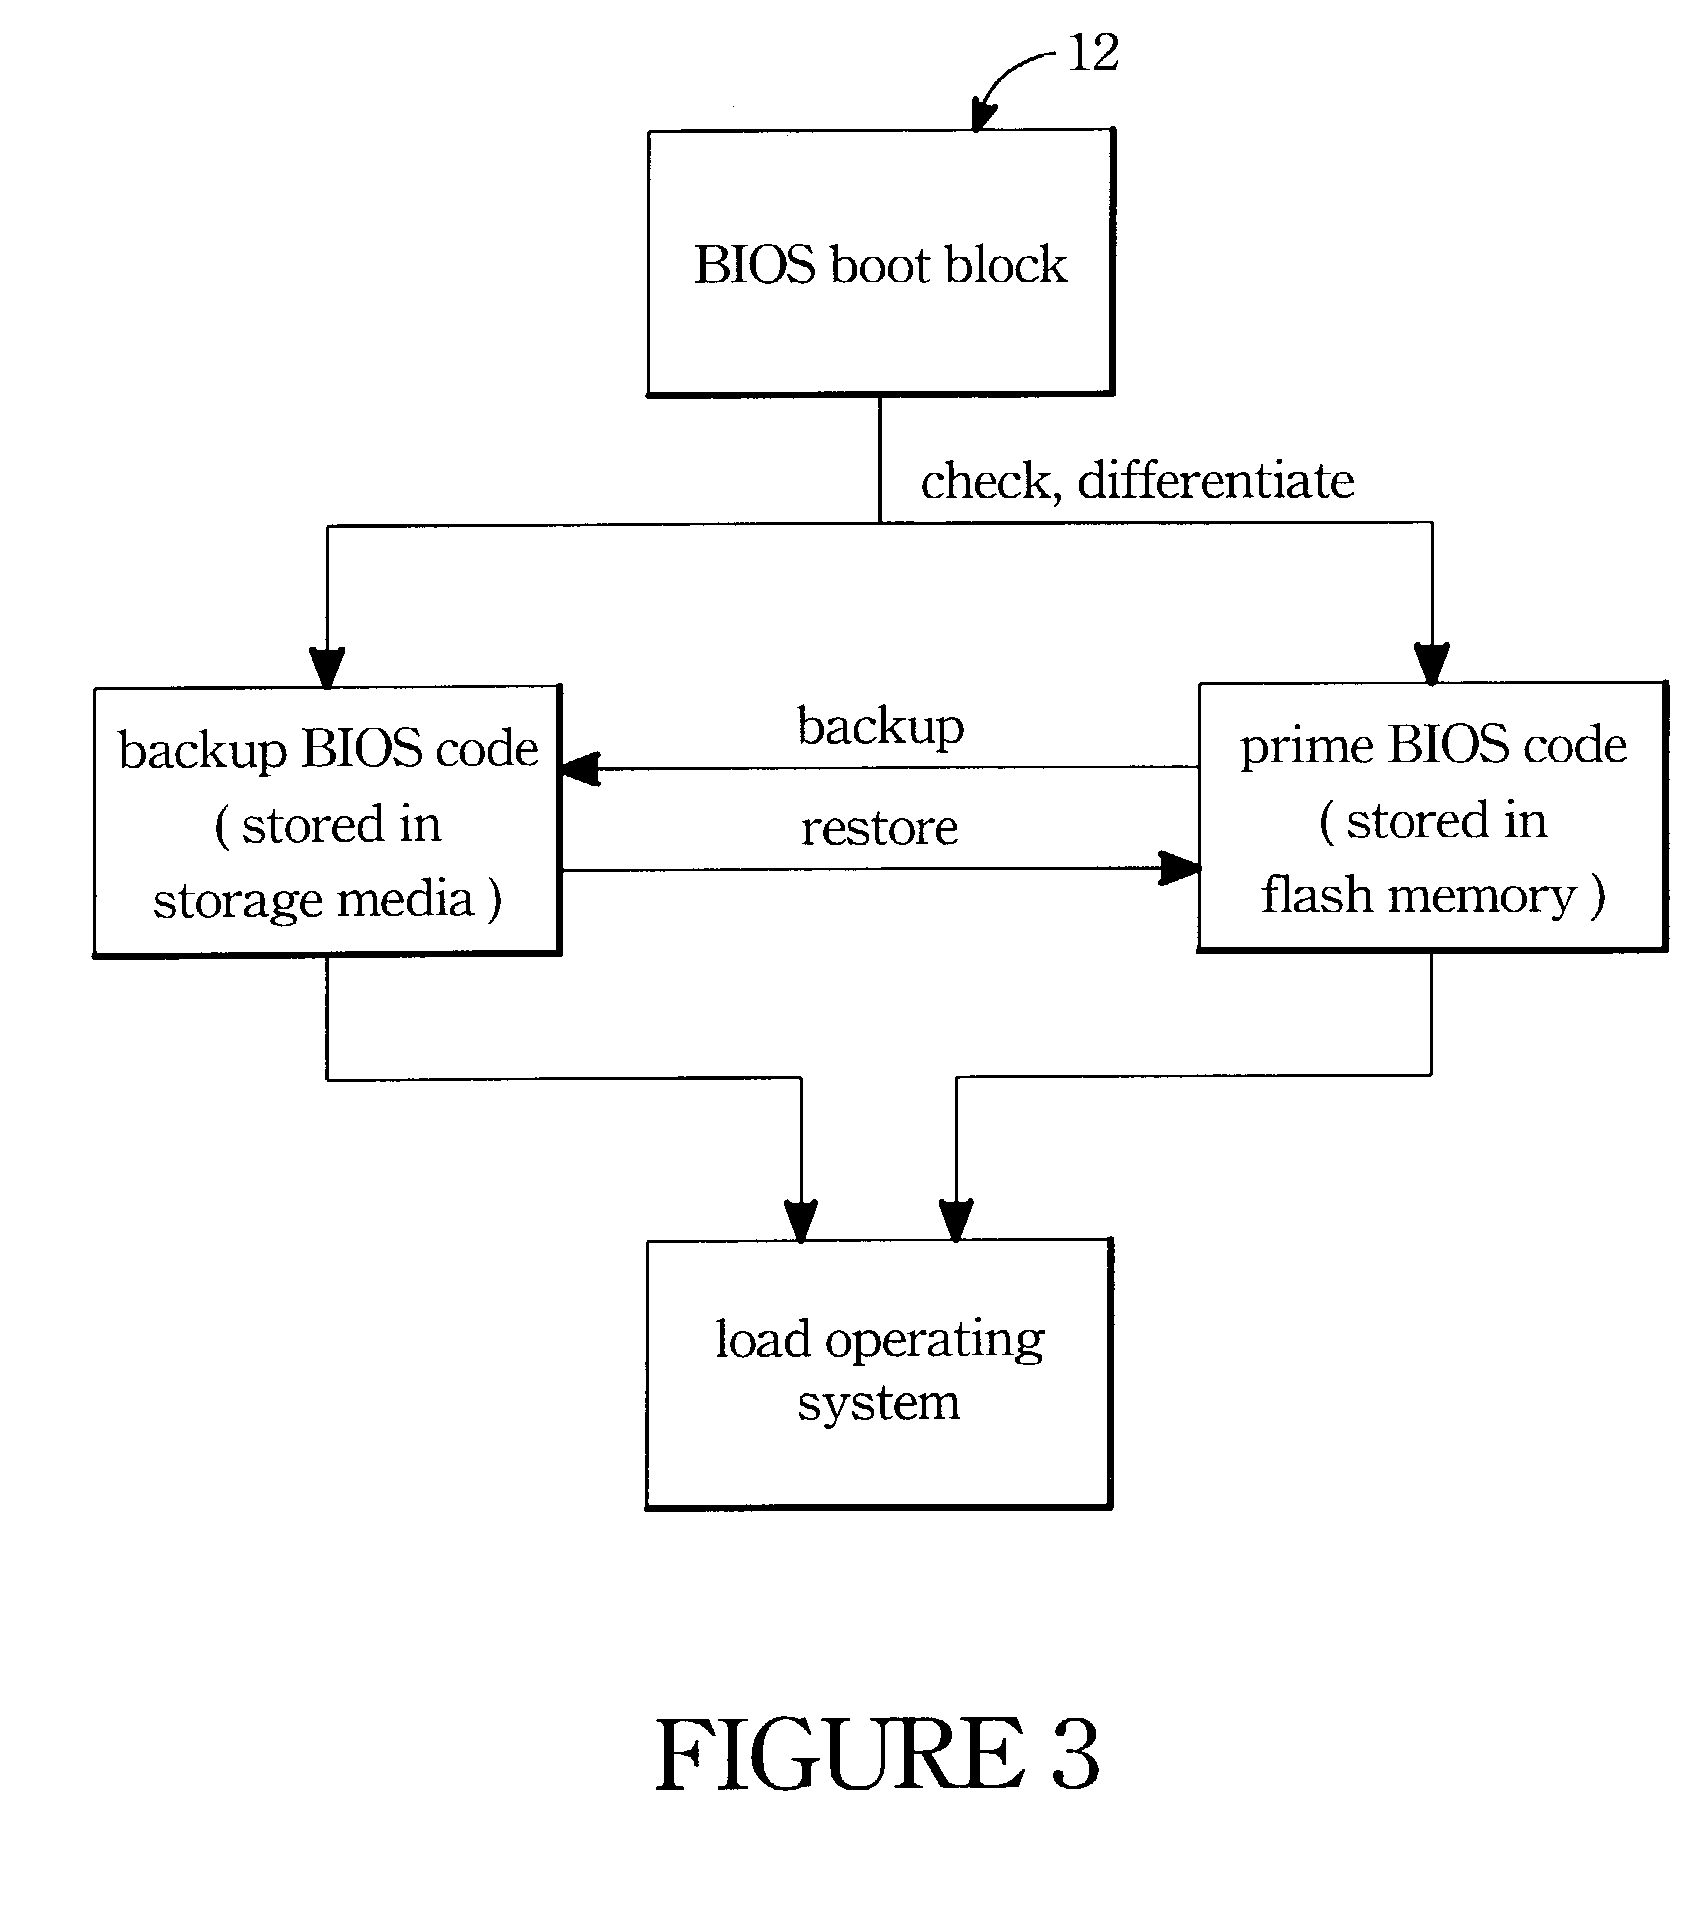 Module and method for automatic restoring BIOS device